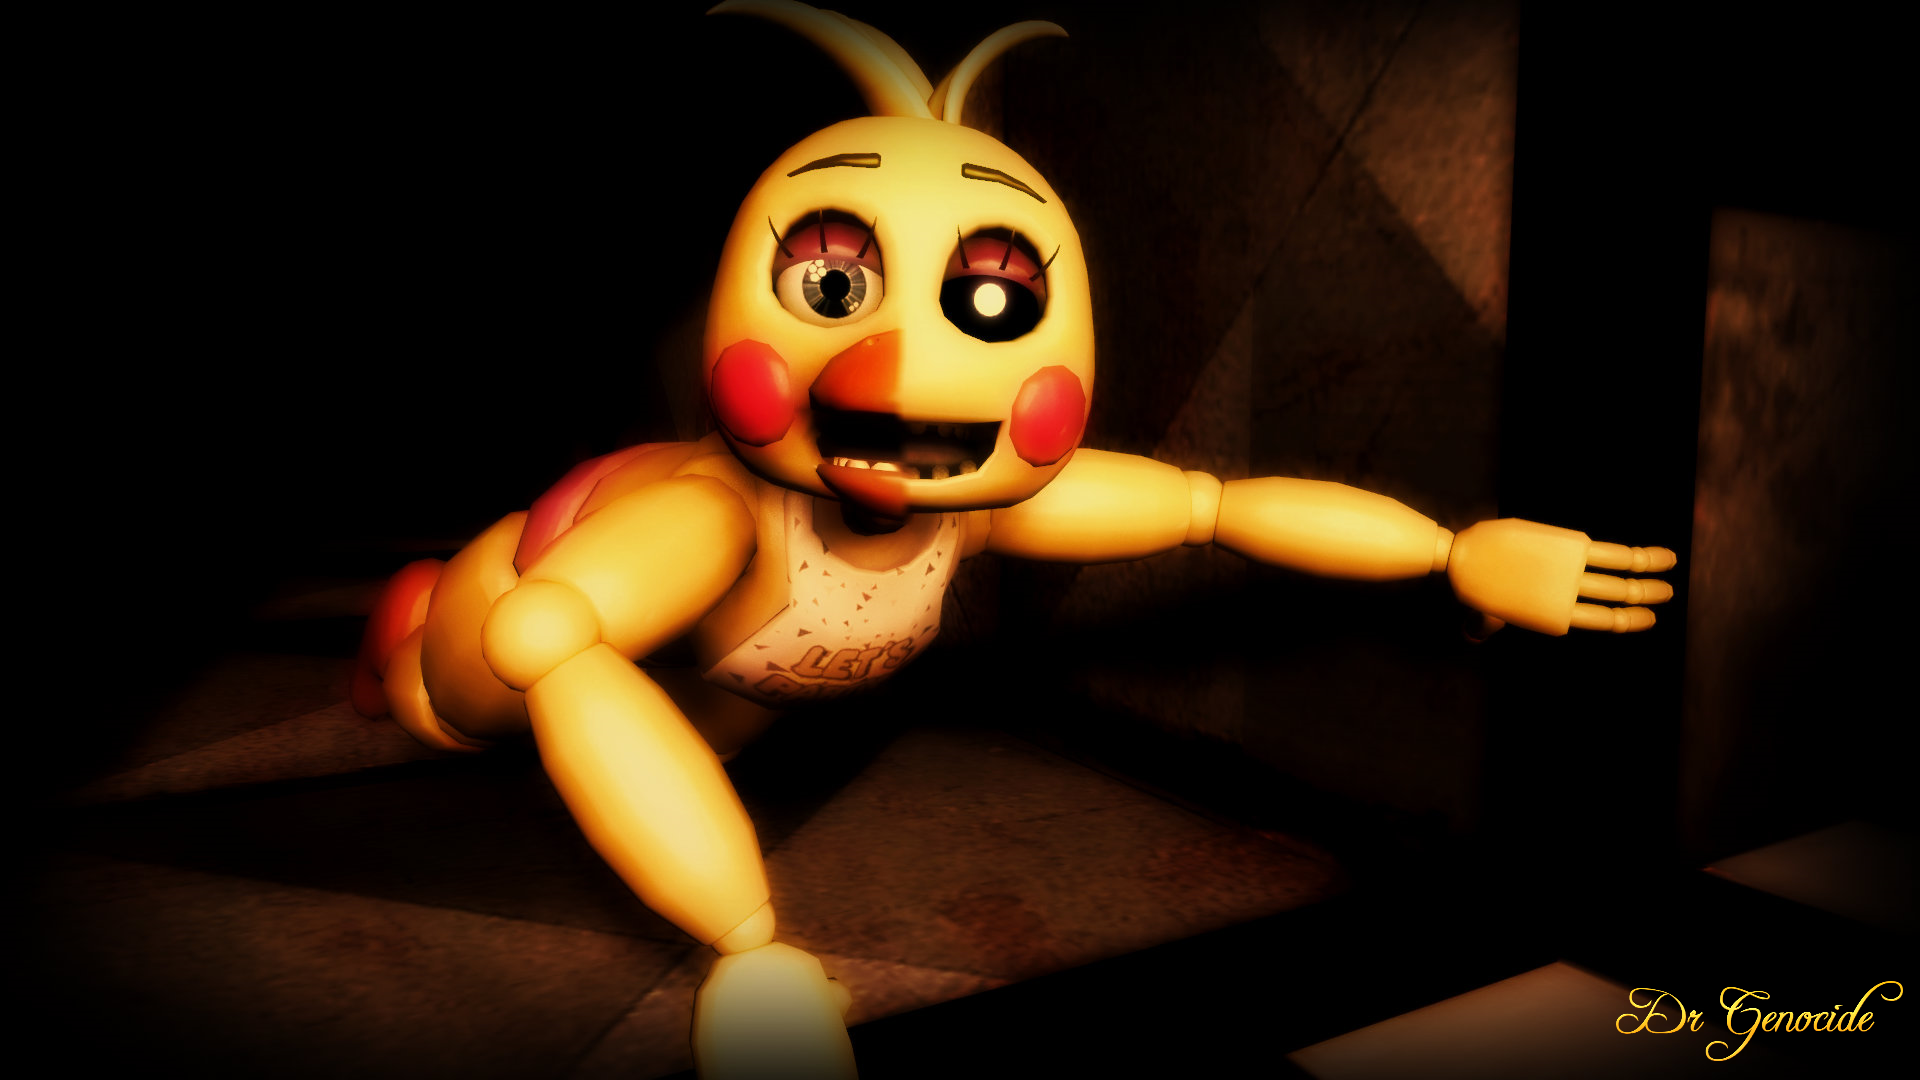 Fnaf2 Toy Chica Wallpaper By Drgenocidesfm